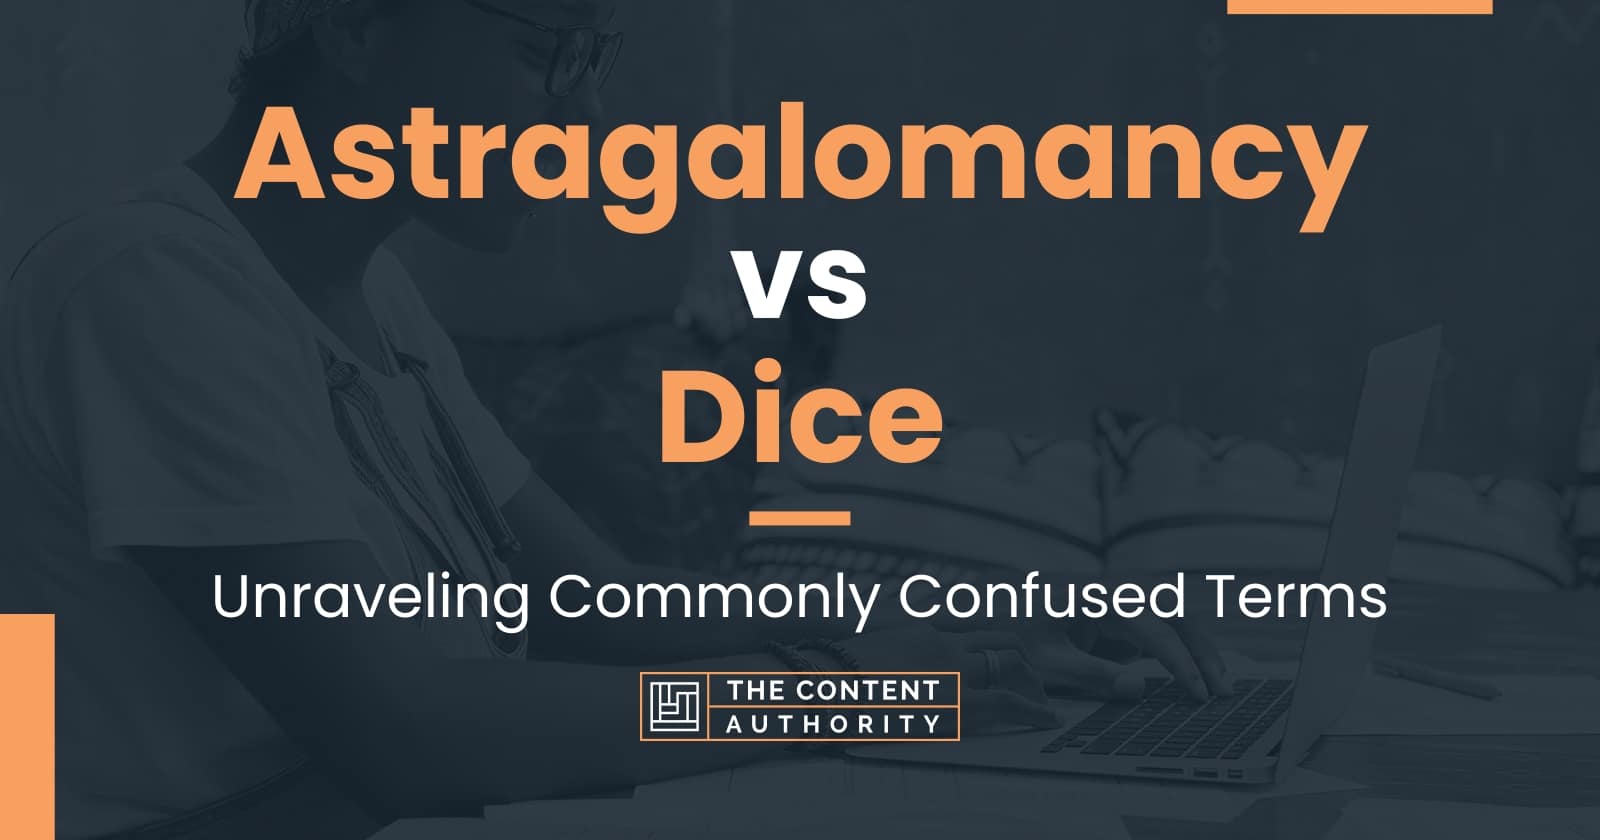 Astragalomancy vs Dice: Unraveling Commonly Confused Terms